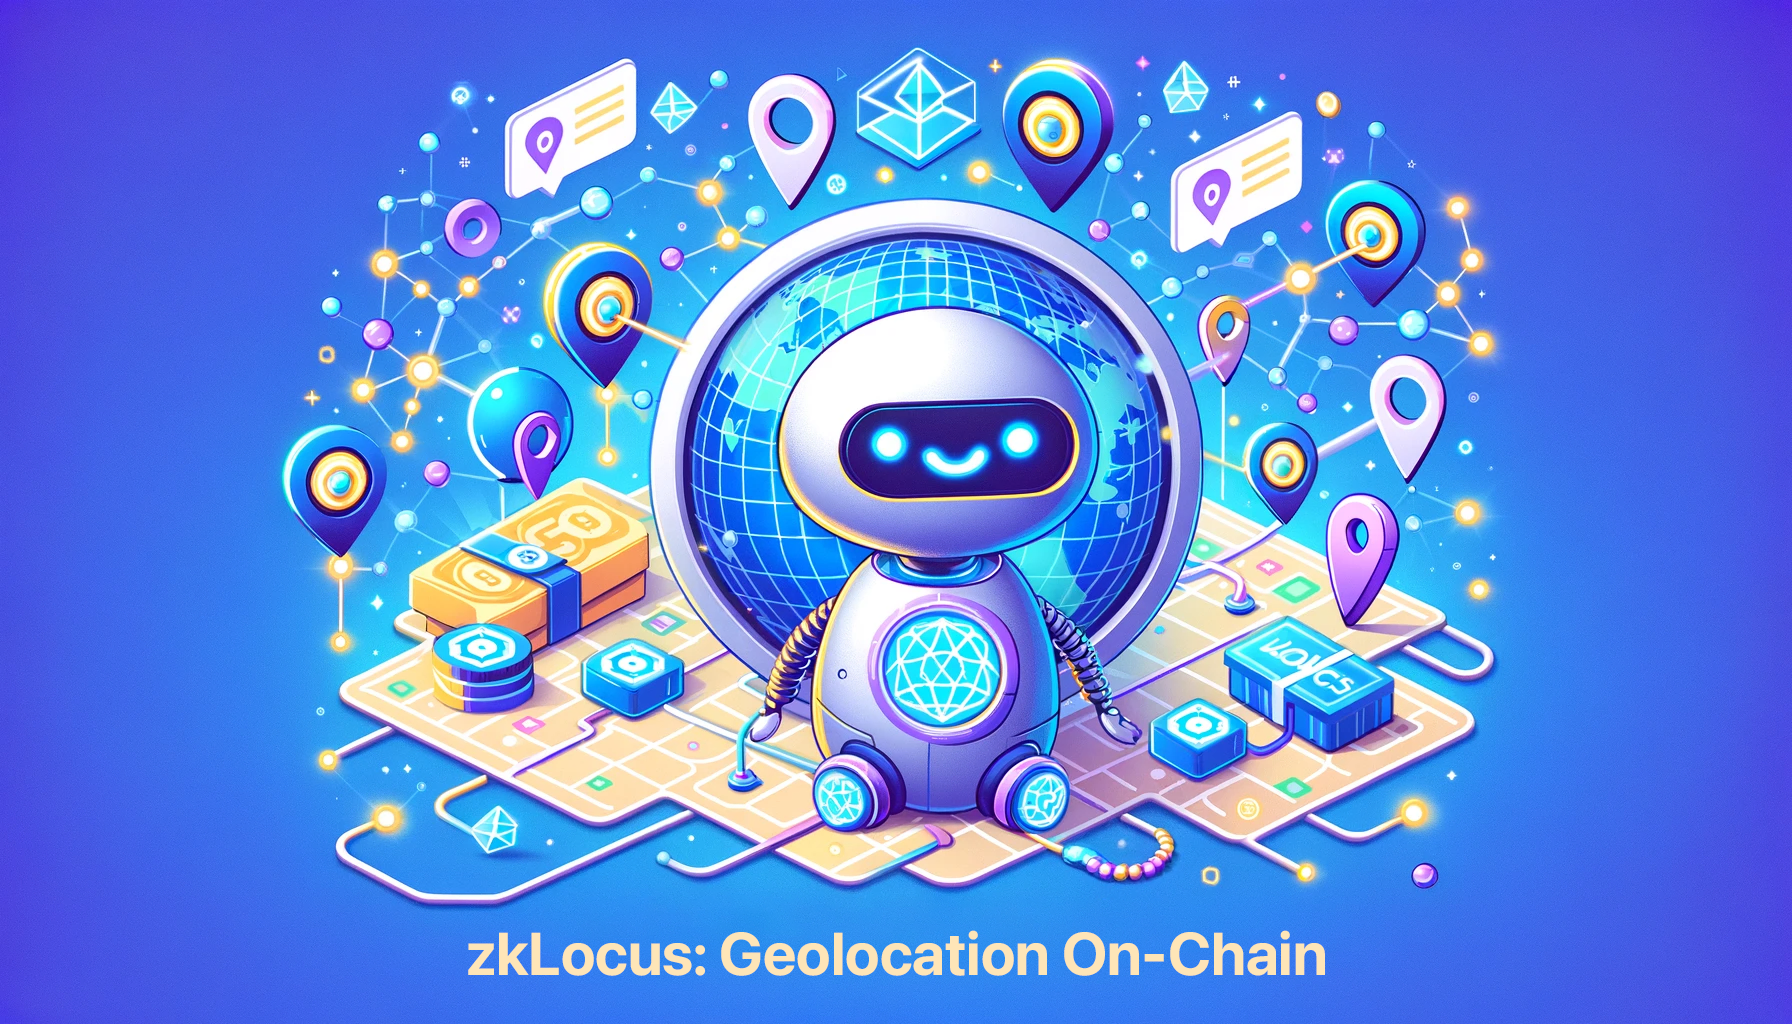 zkLocus is providing real-world geographical coordinates on-chain. zkLocus is cross-chain compatible, and works on any EVM chain and the Mina Blockchain